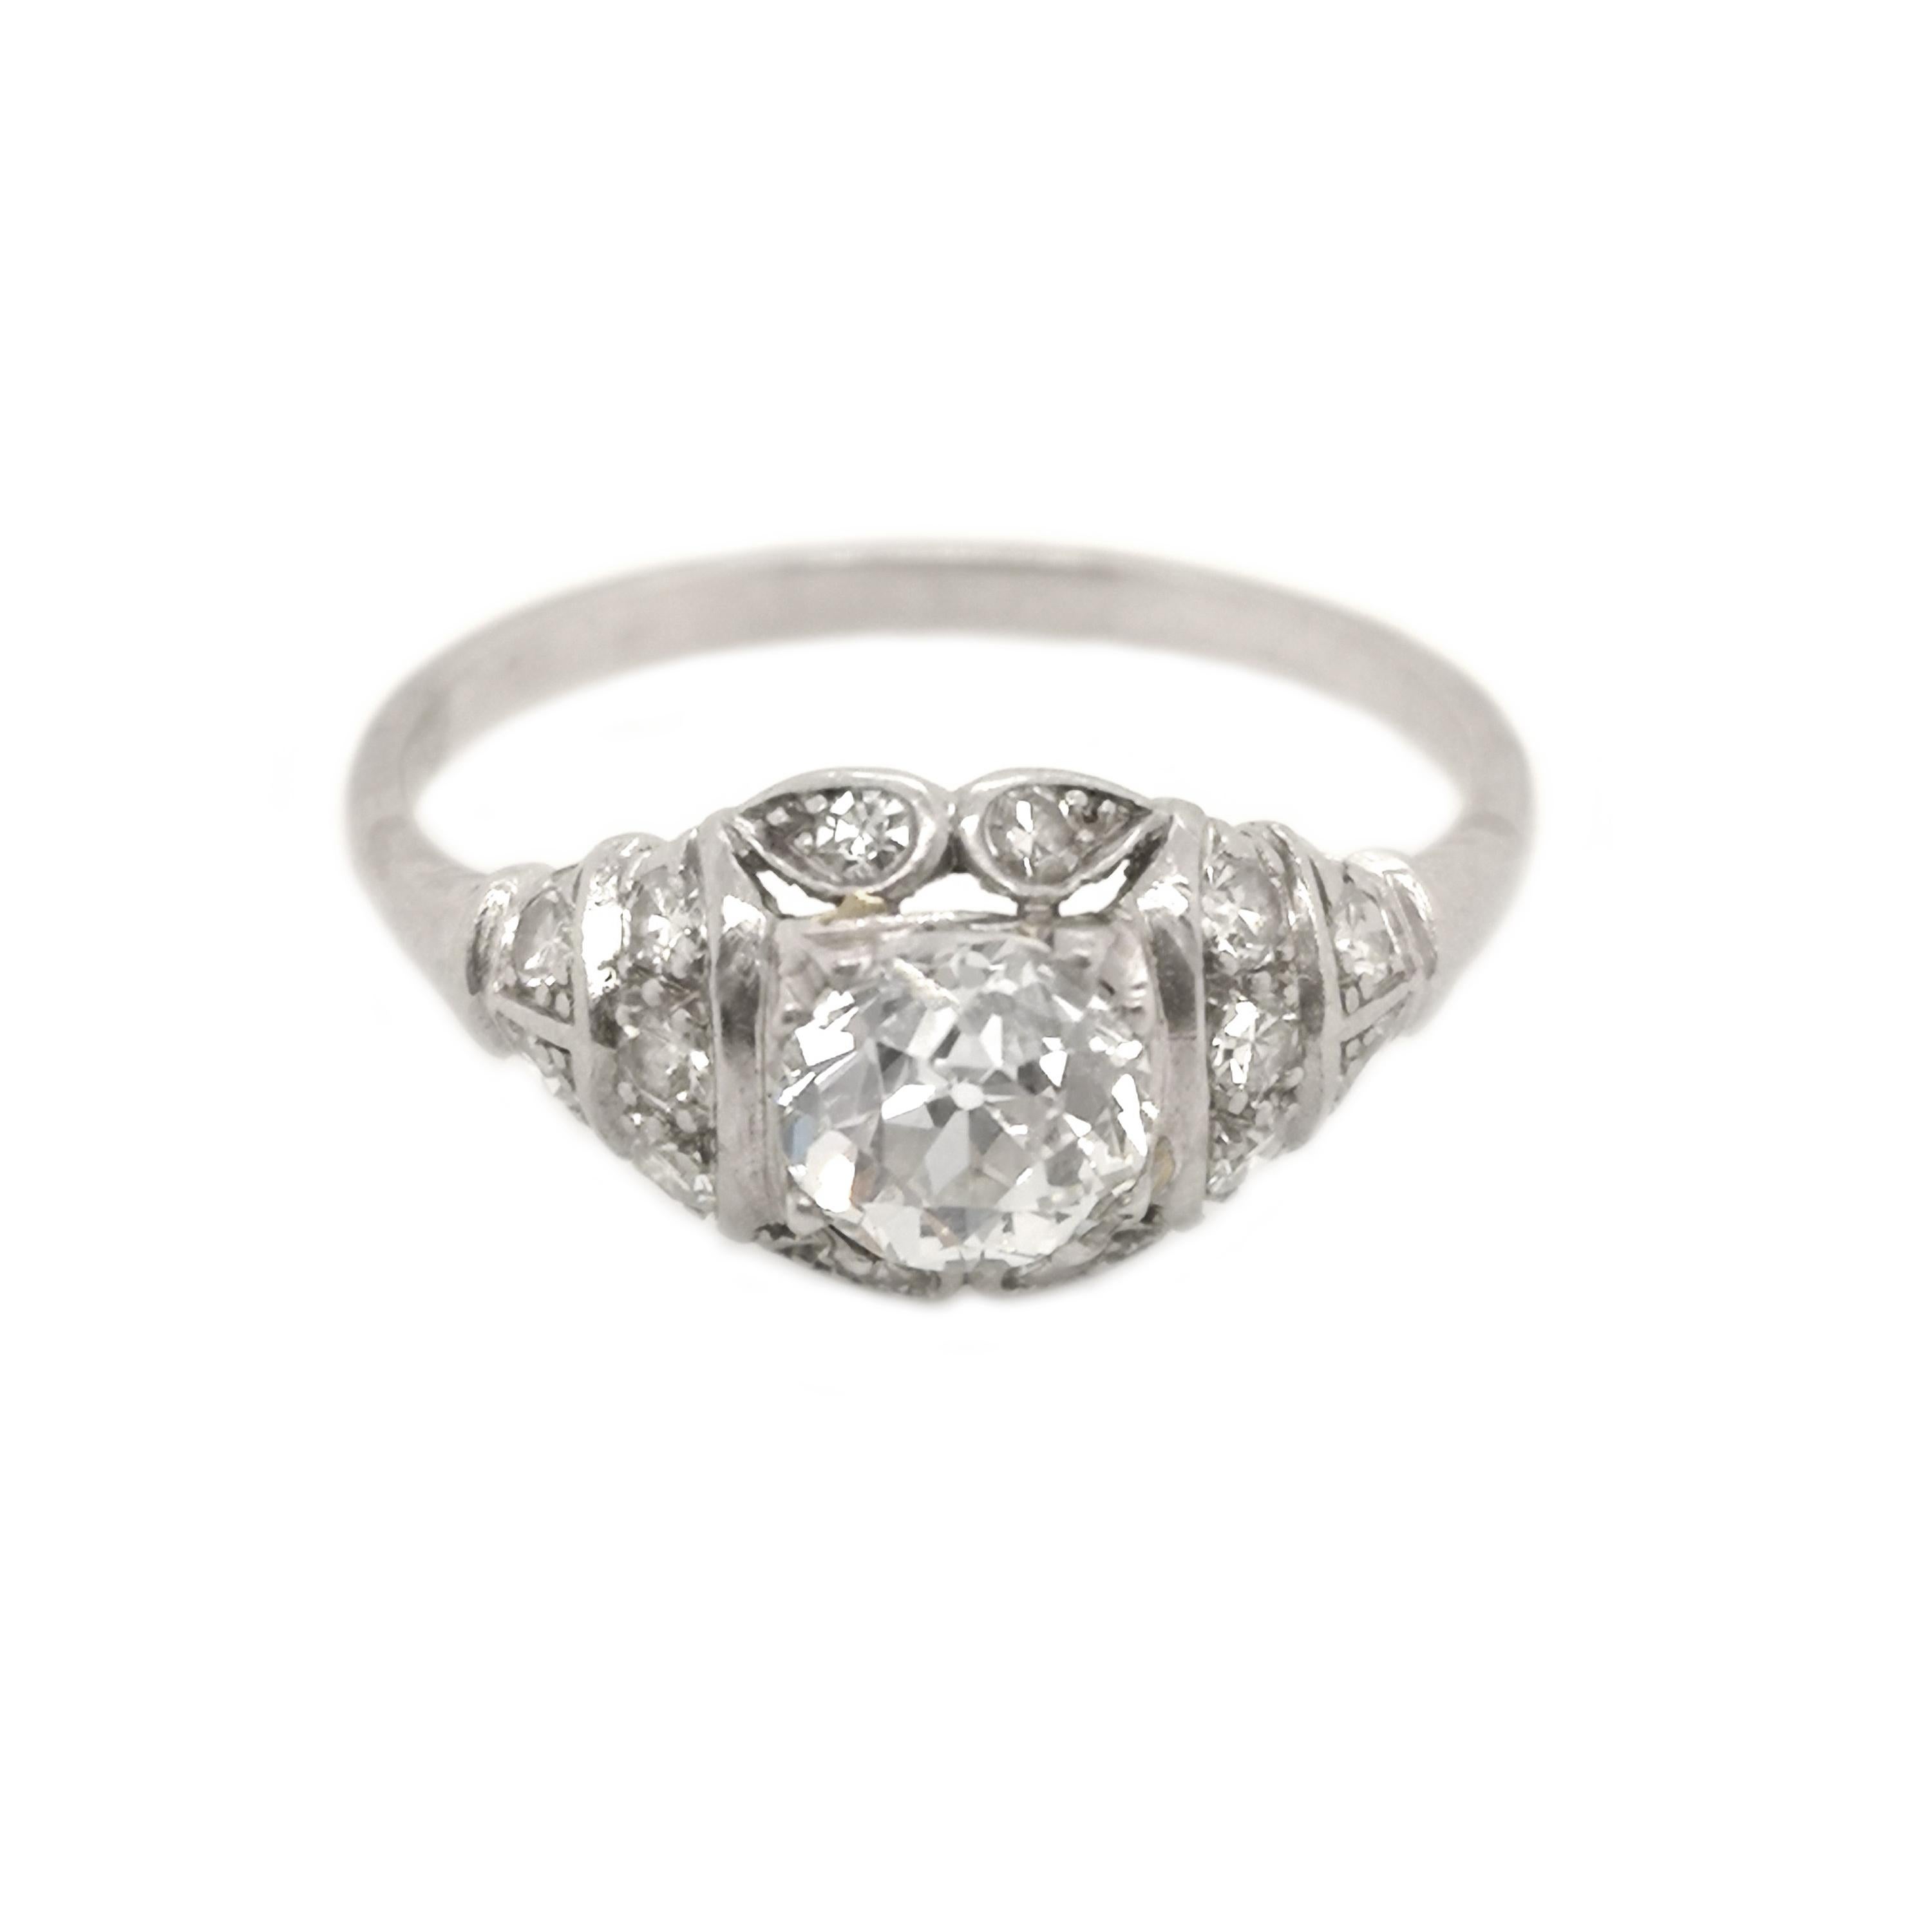 Late Art Deco Diamond and Platinum Ring, 0.85 Carats H SI1, circa 1940 In Good Condition For Sale In London, GB